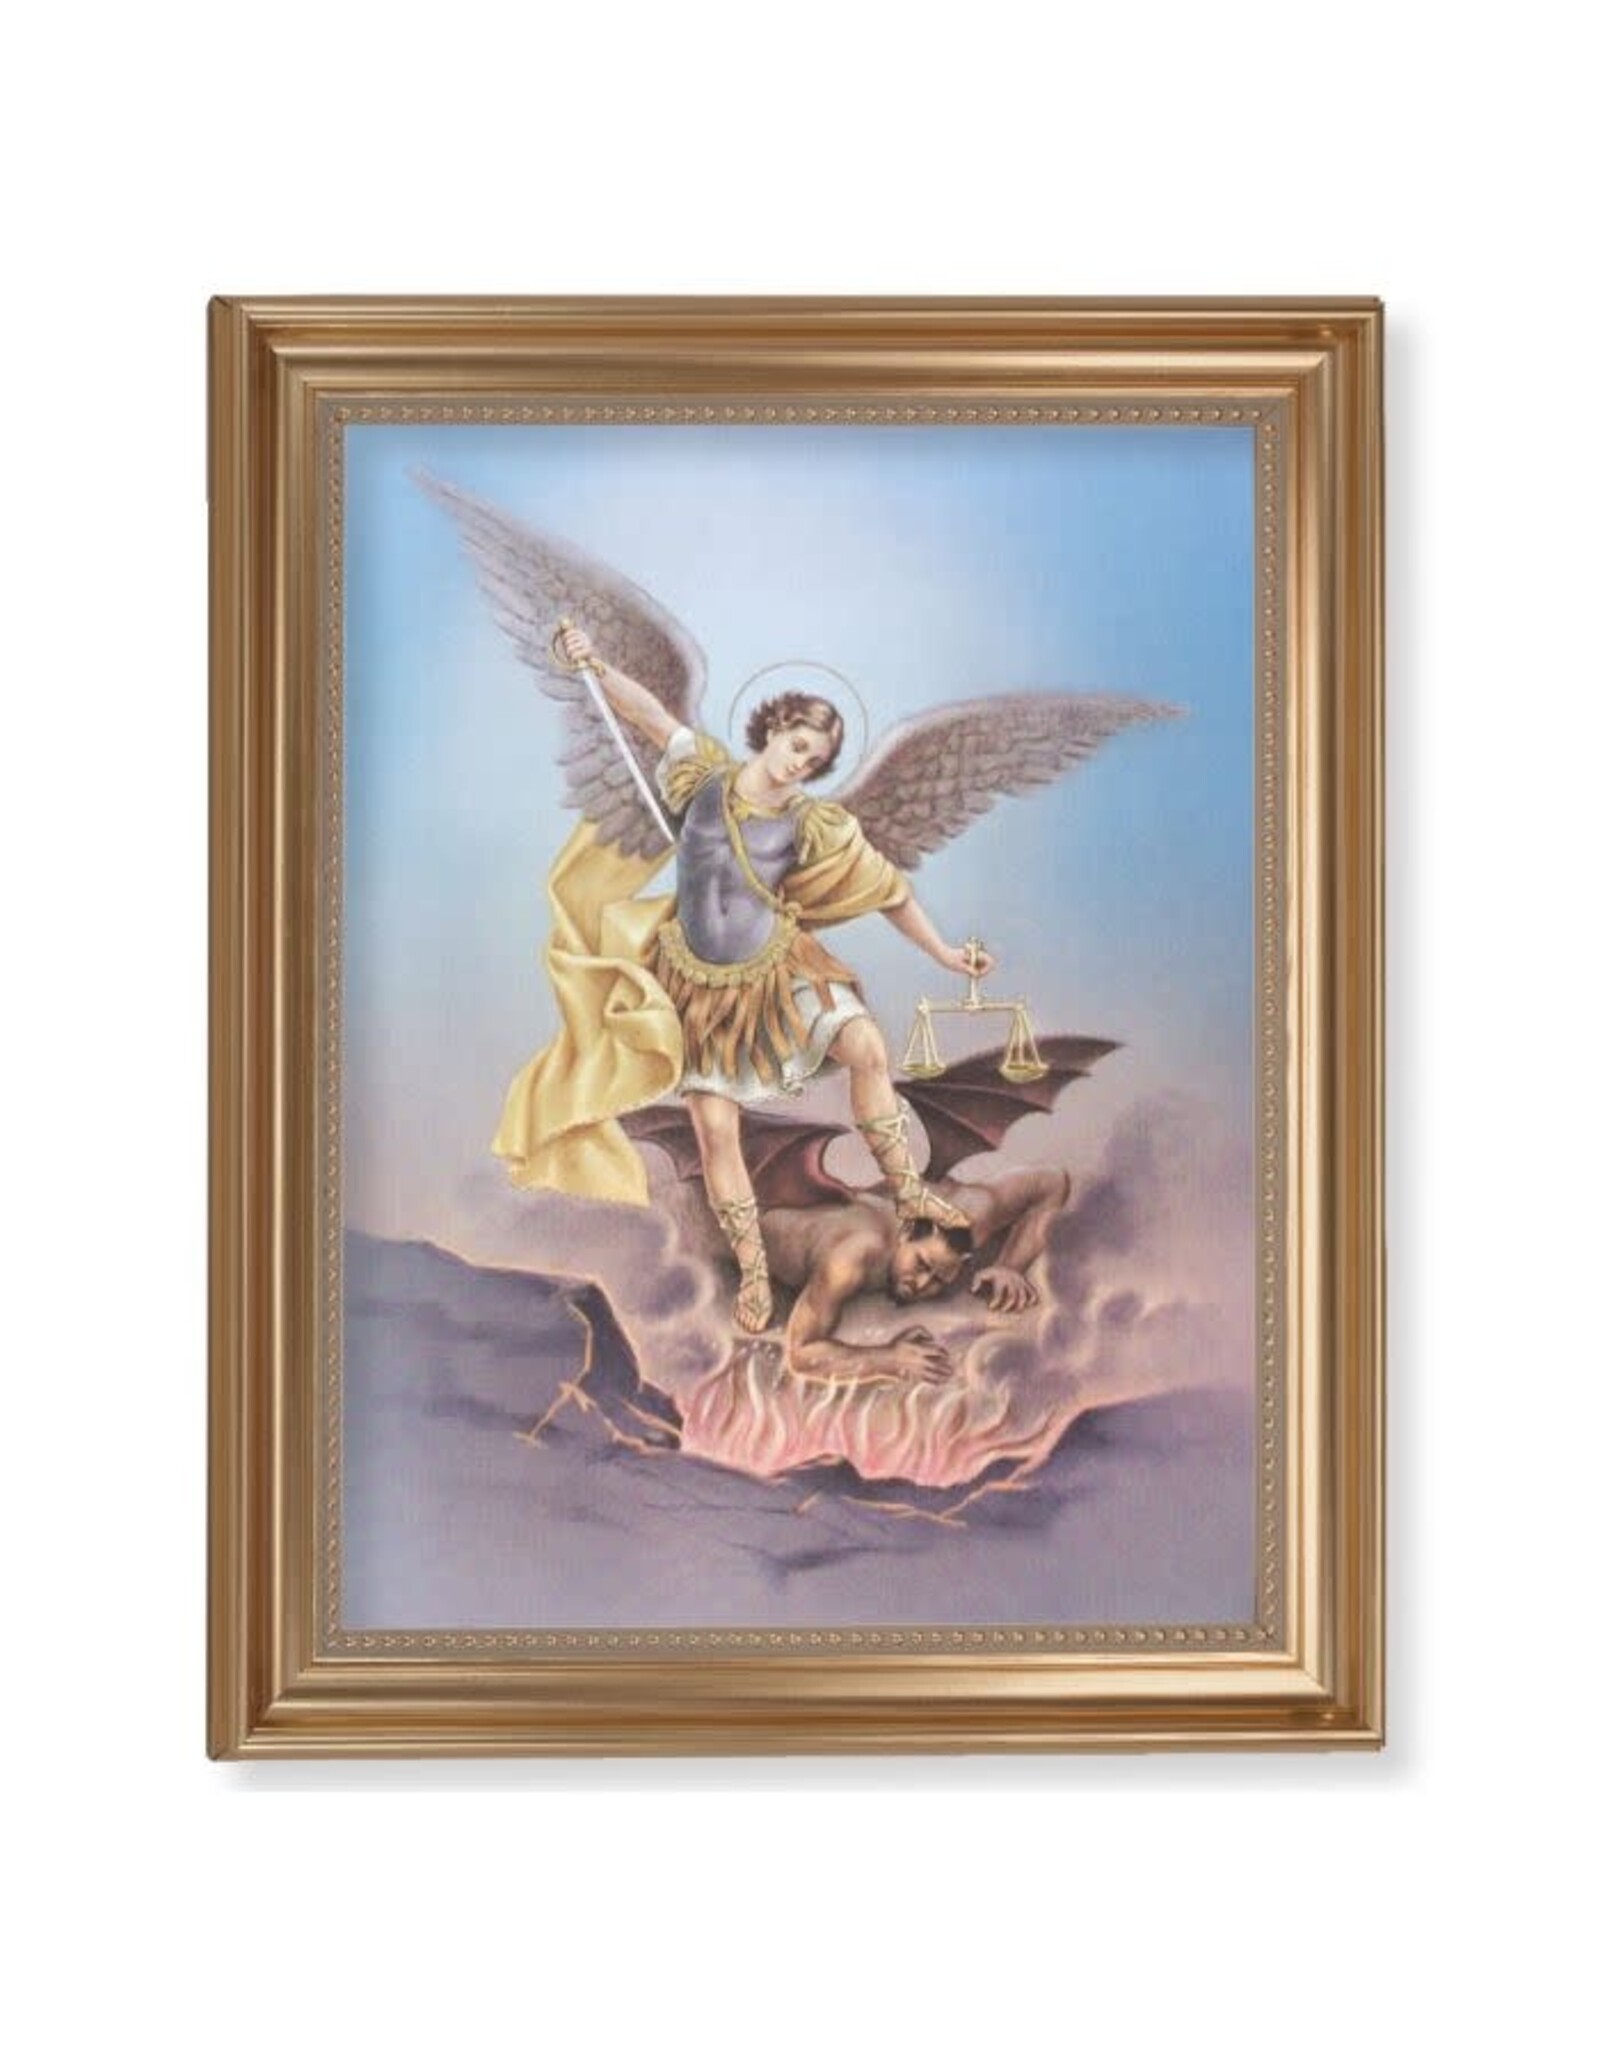 Hirten Picture - St Michael in Gold Leaf Antique Finished Frame (11 x 14")